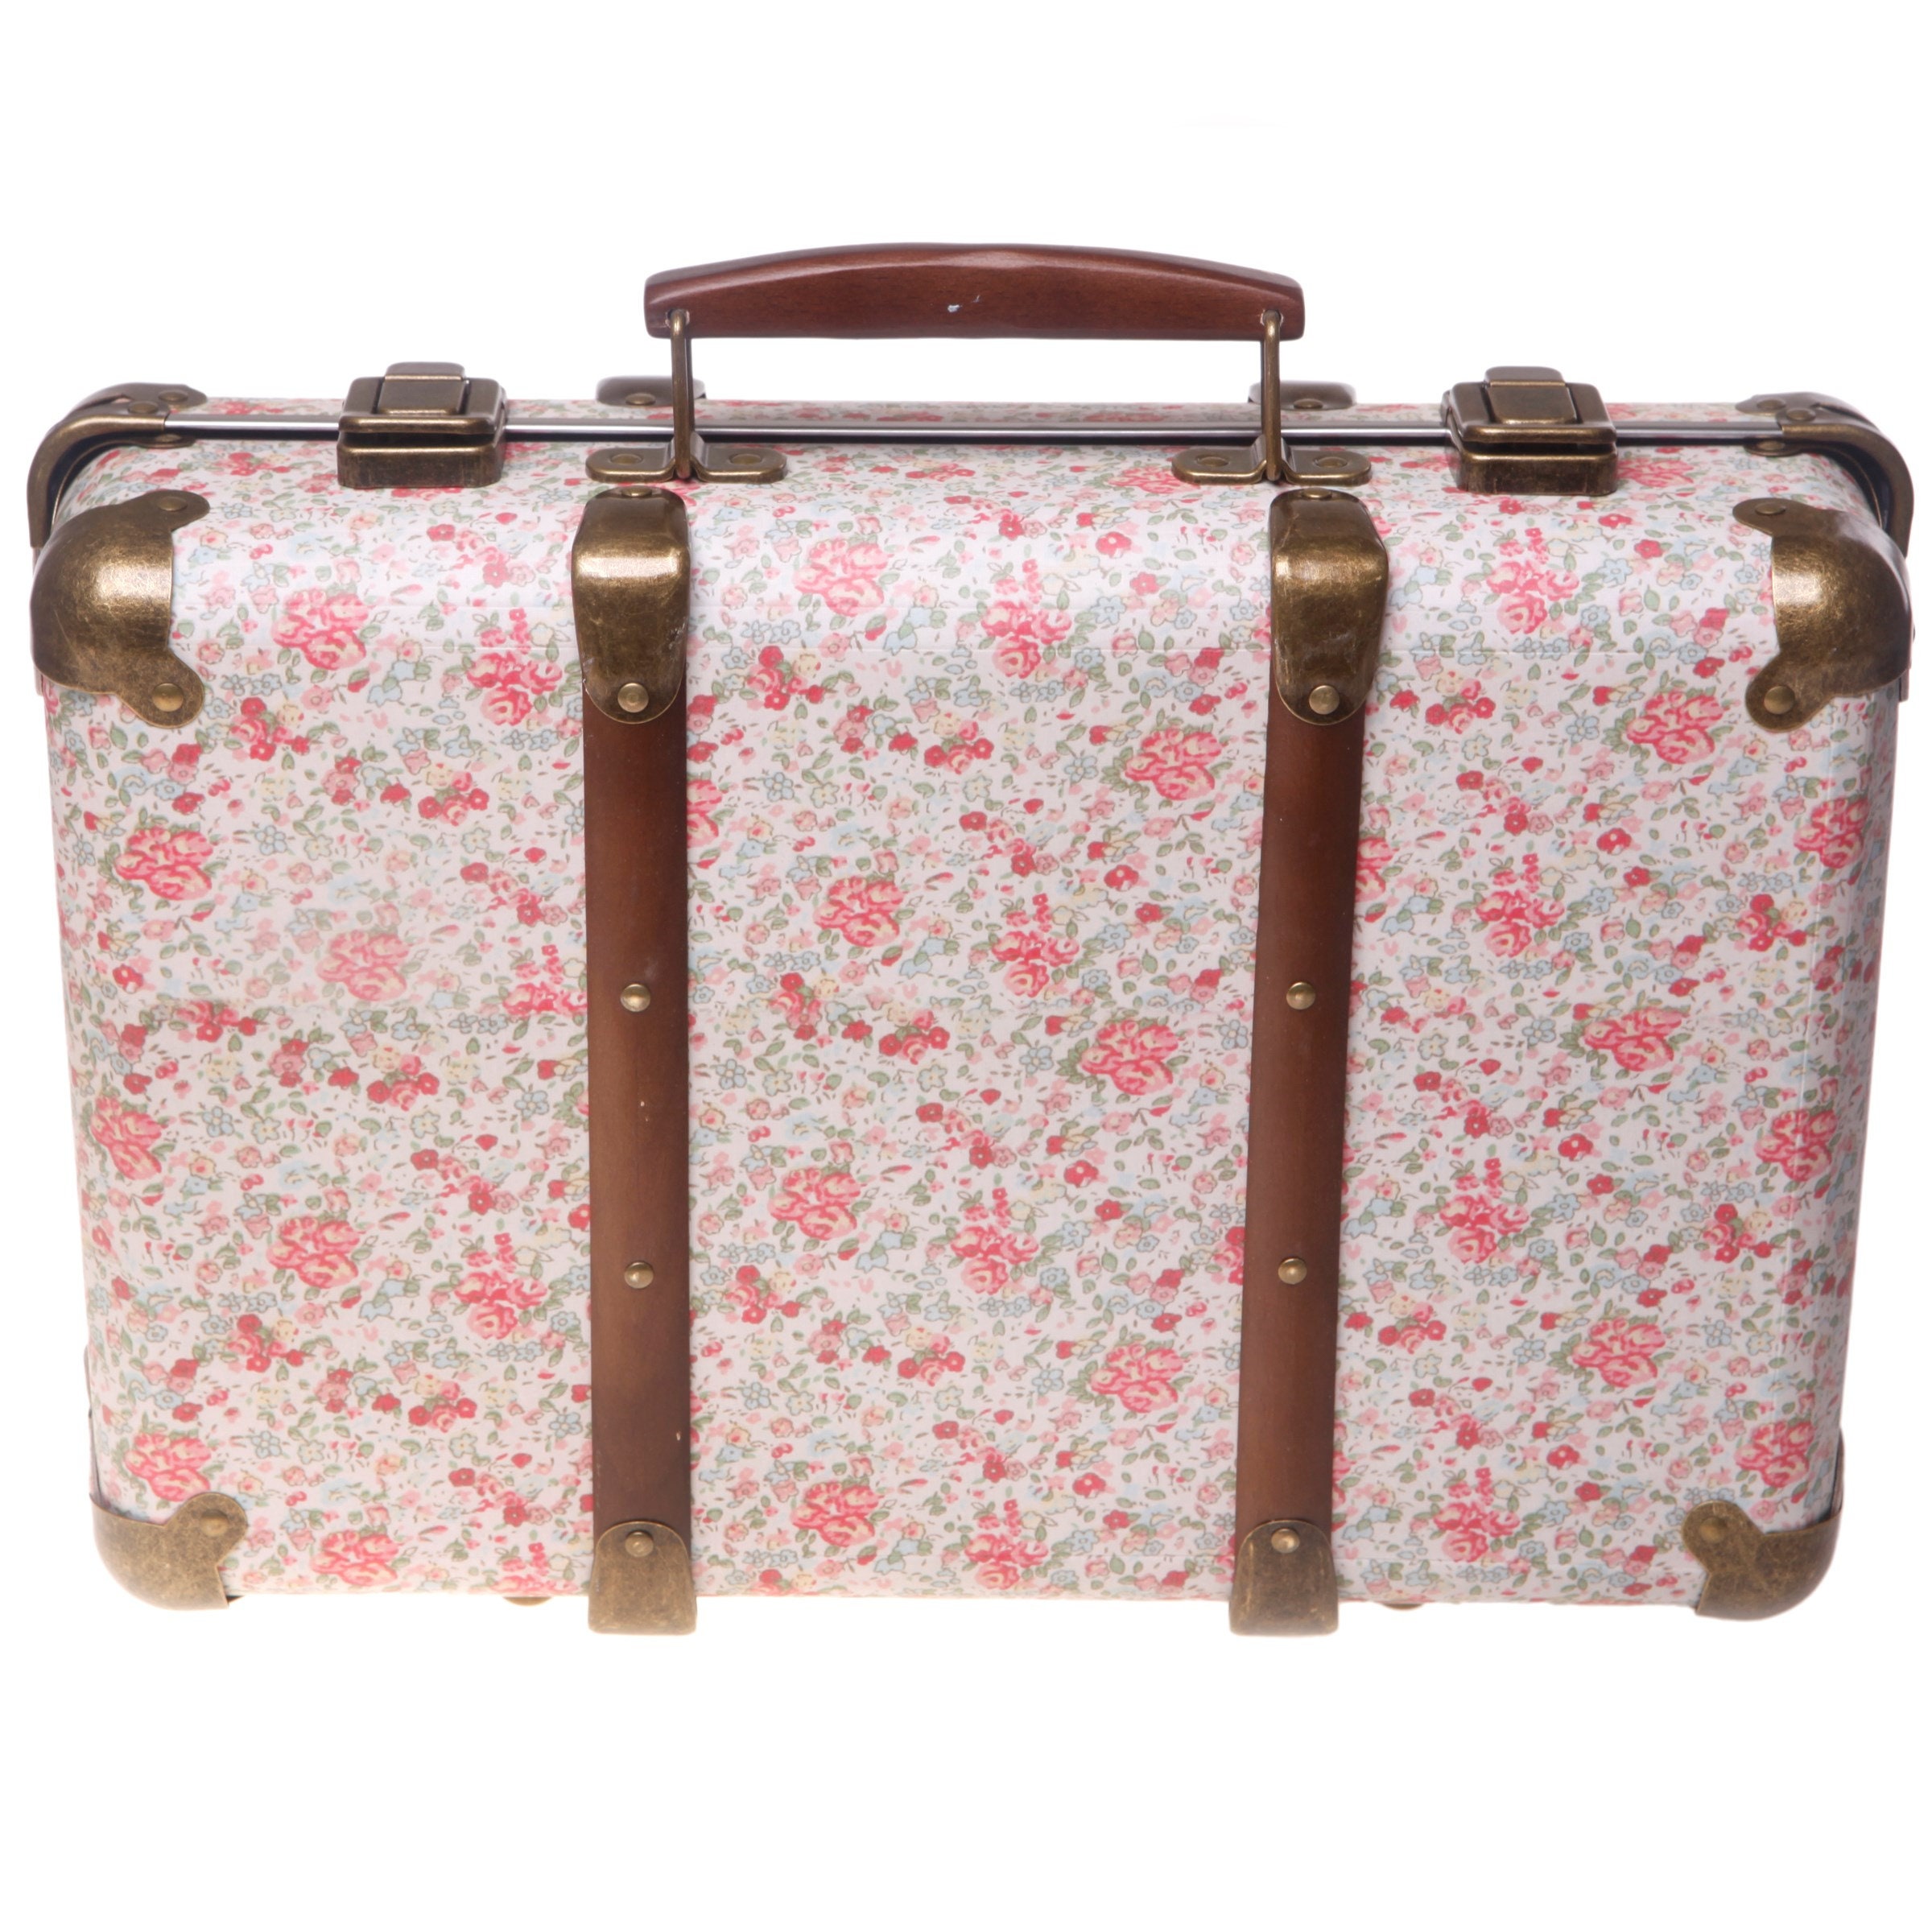 3 Storage Suitcases Vintage RoseSass & Belle Box Decorative Cases Home Gift 